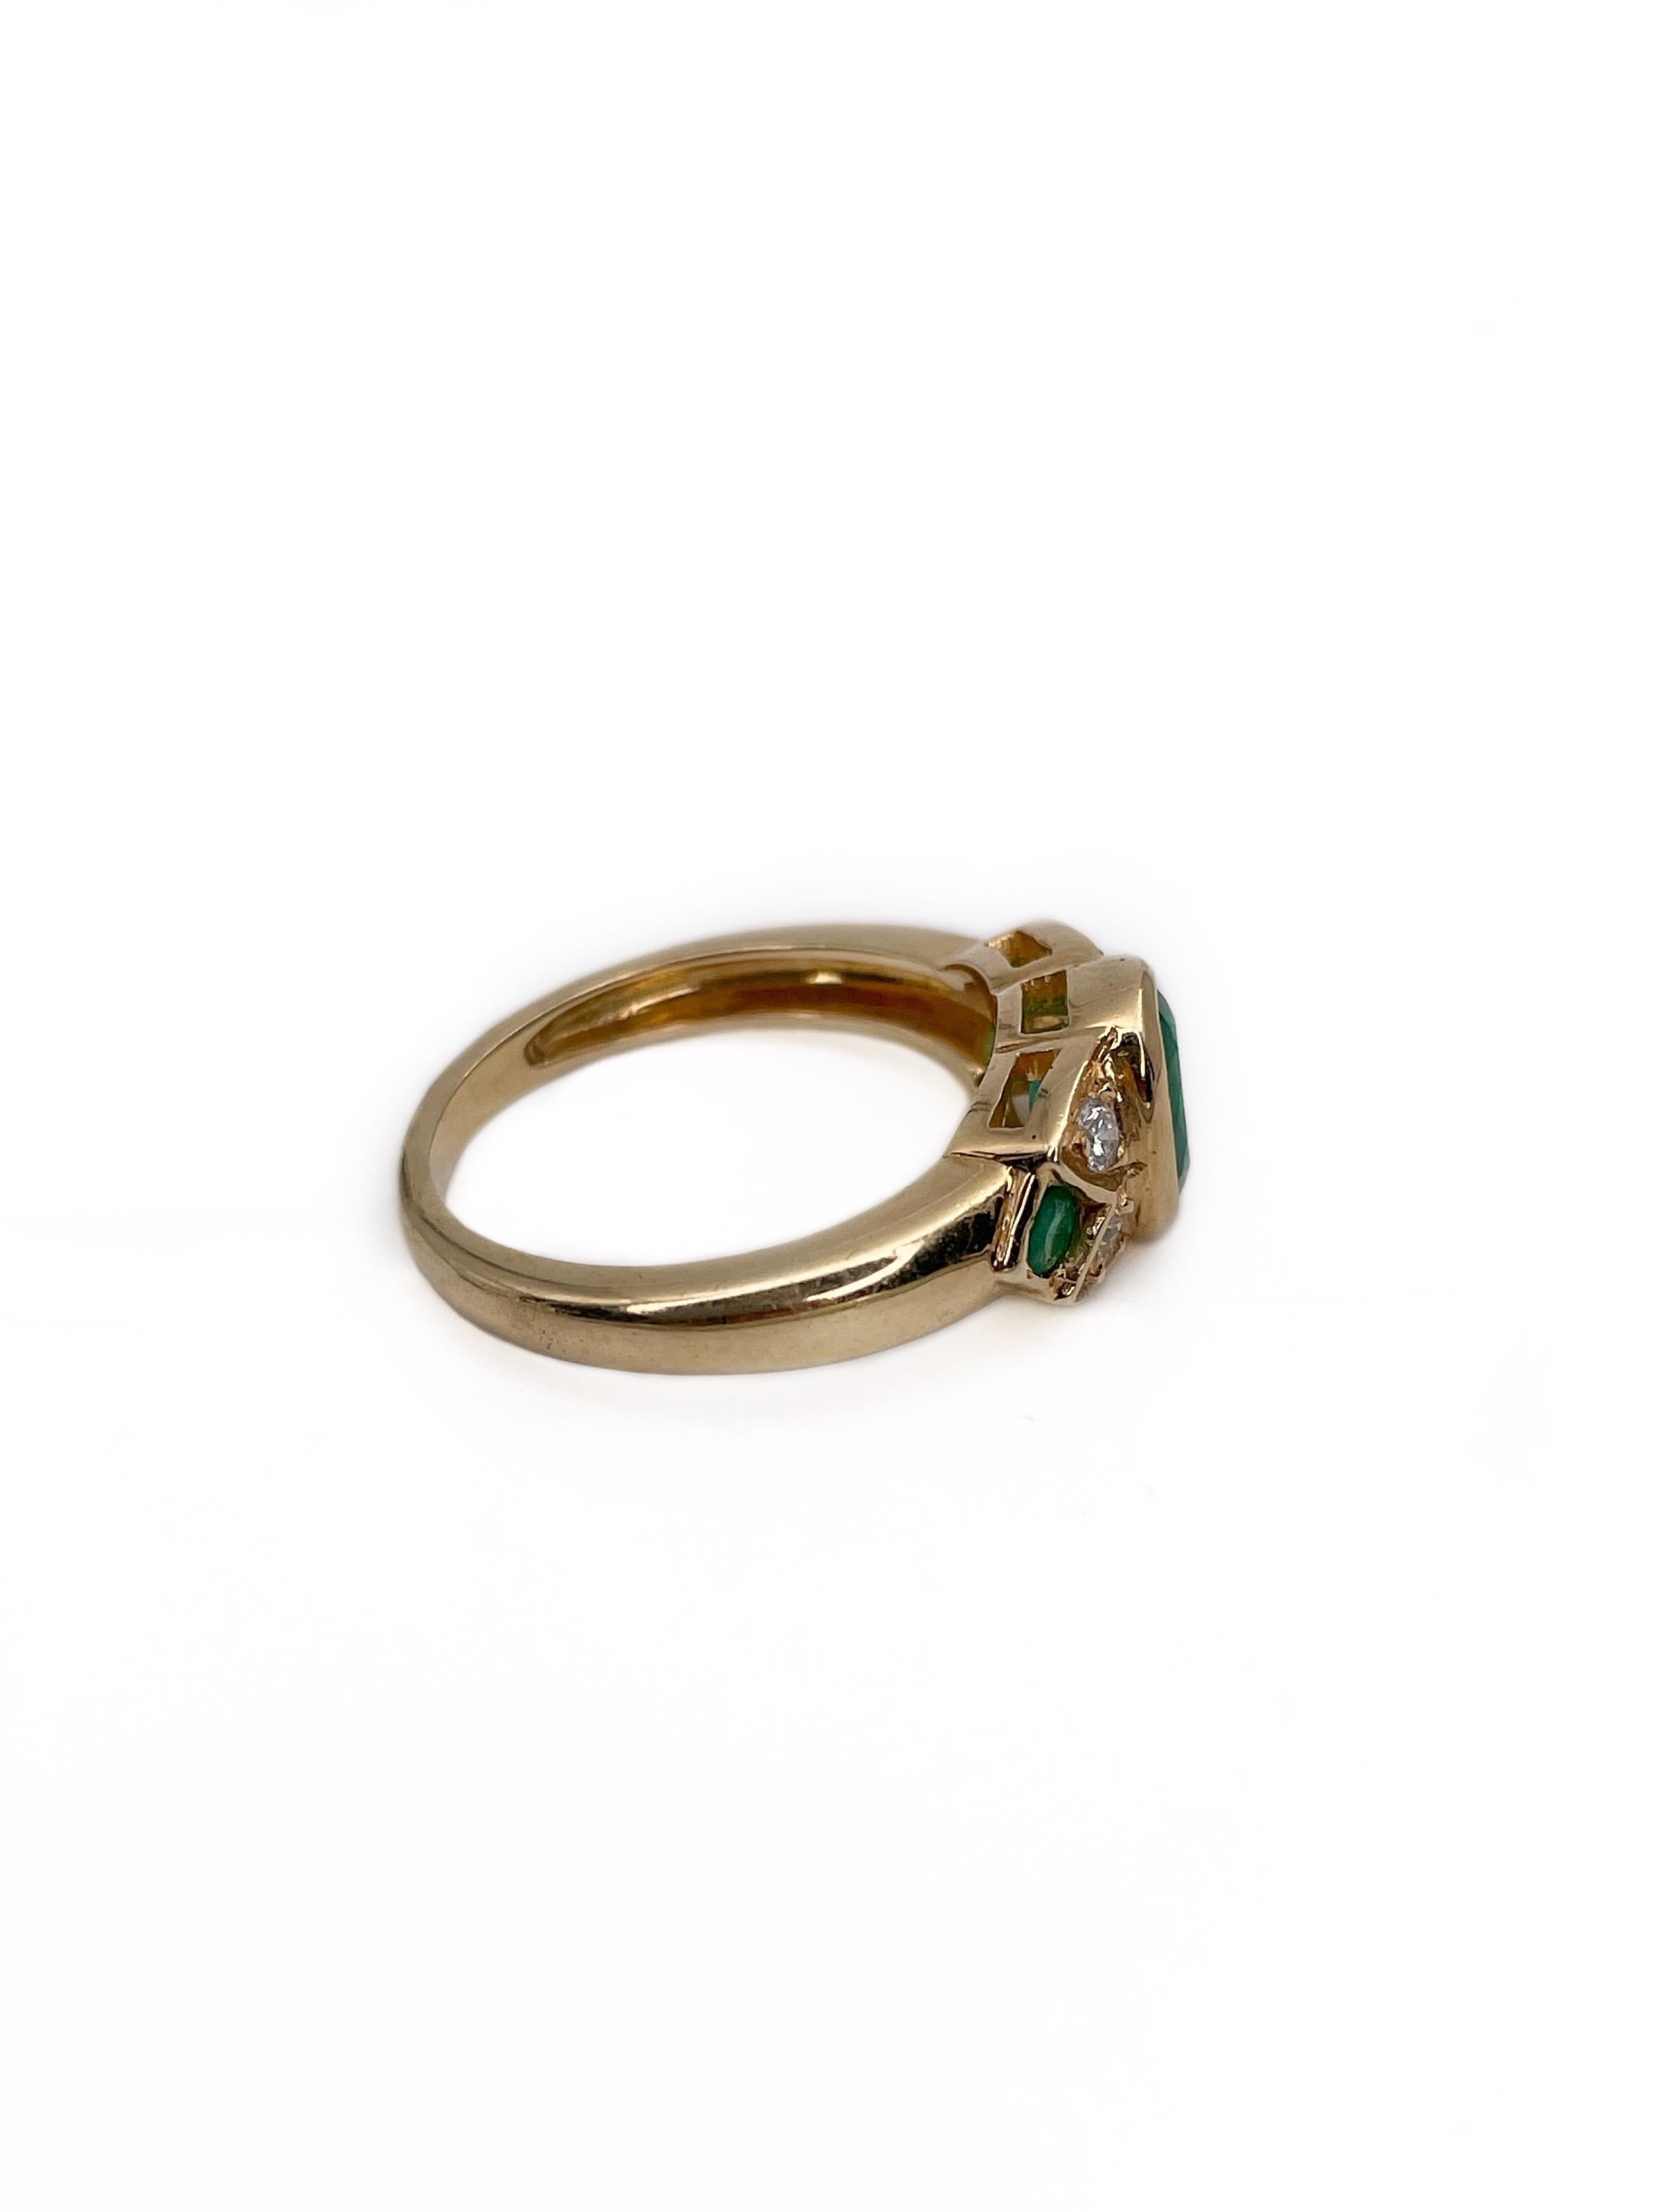 This is an amazing vintage band ring crafted in 18K yellow gold. The piece features 3 emeralds: 1.33ct, vstbG 3/6, SI-I1, F.  The gems are paired with 4 brilliant cut diamonds: 0.18ct, RW-W, P1.

Weight: 4.37g
Size: 16.5 (US6)

IMPORTANT: please ask